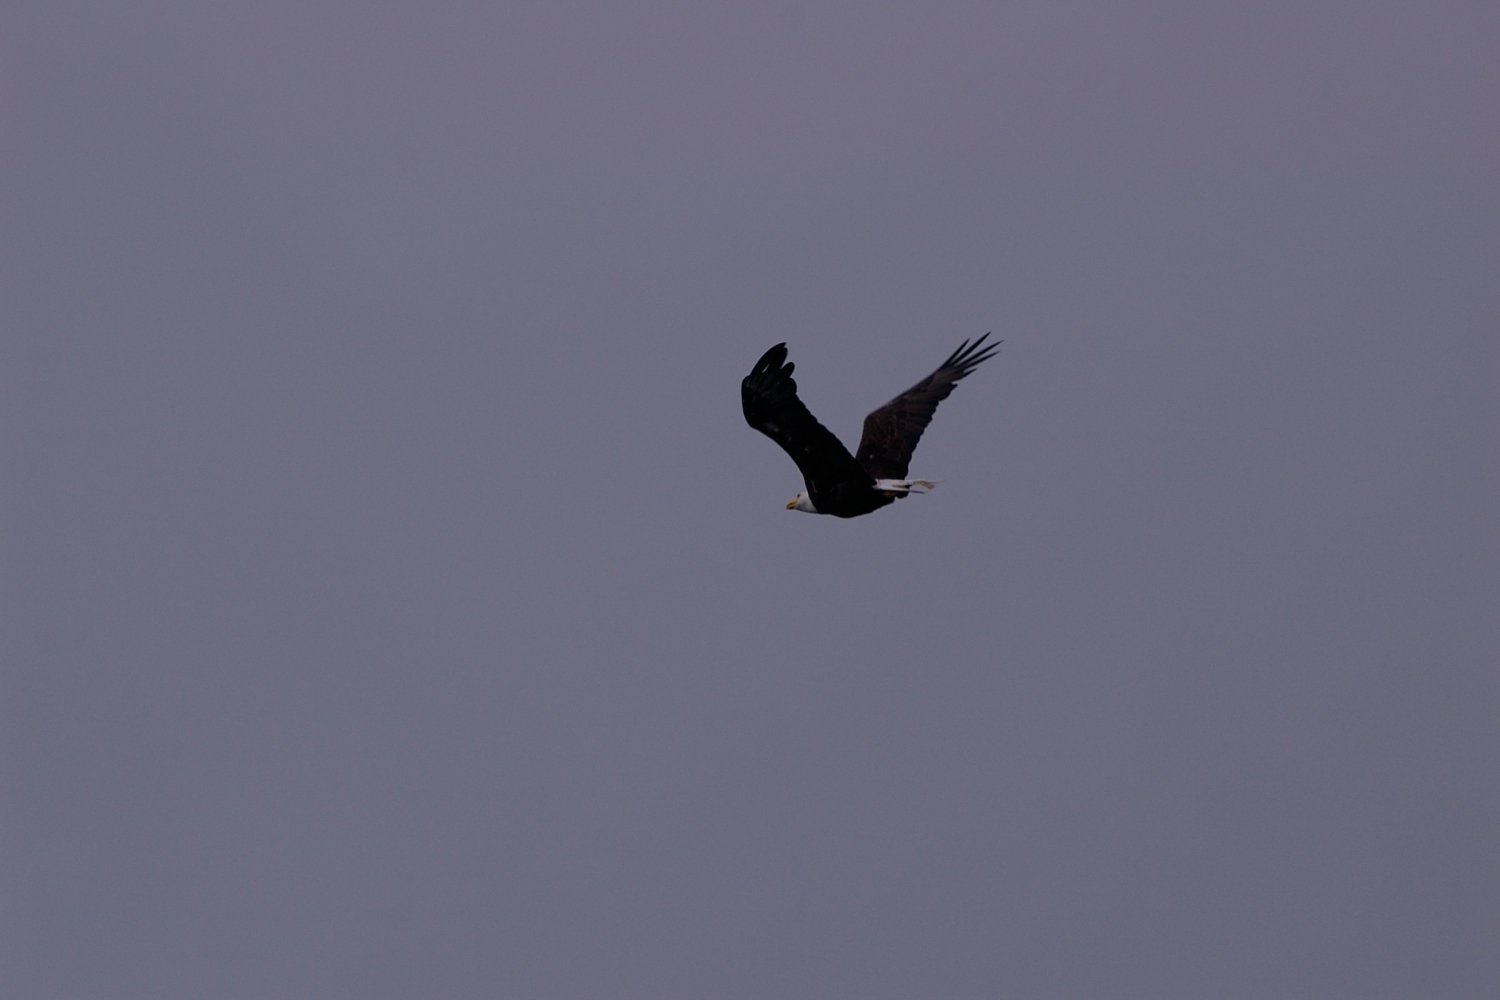 Eagles in campbell river image001 (47).jpg